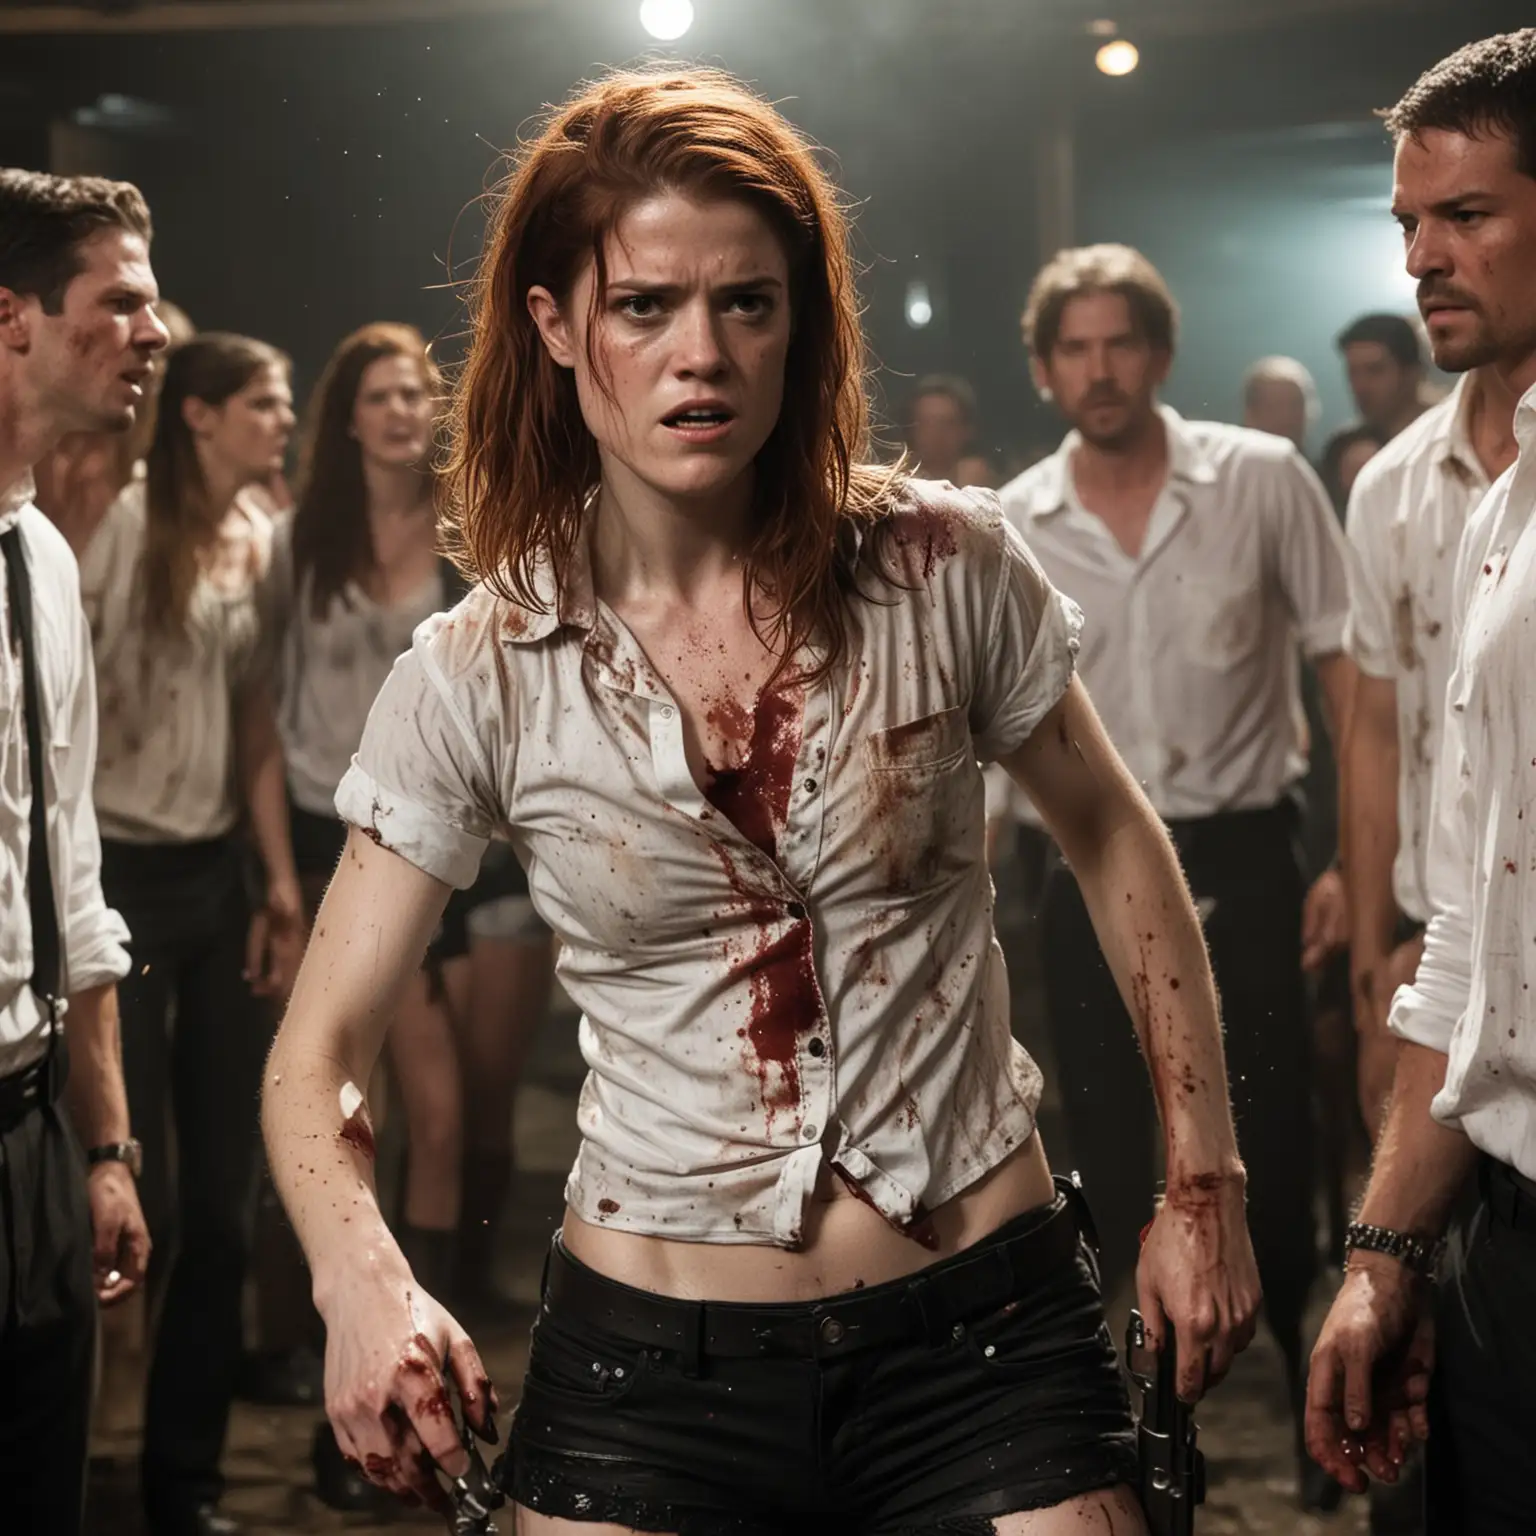 Rose Leslie as a Gritty Fighter in a Nightclub